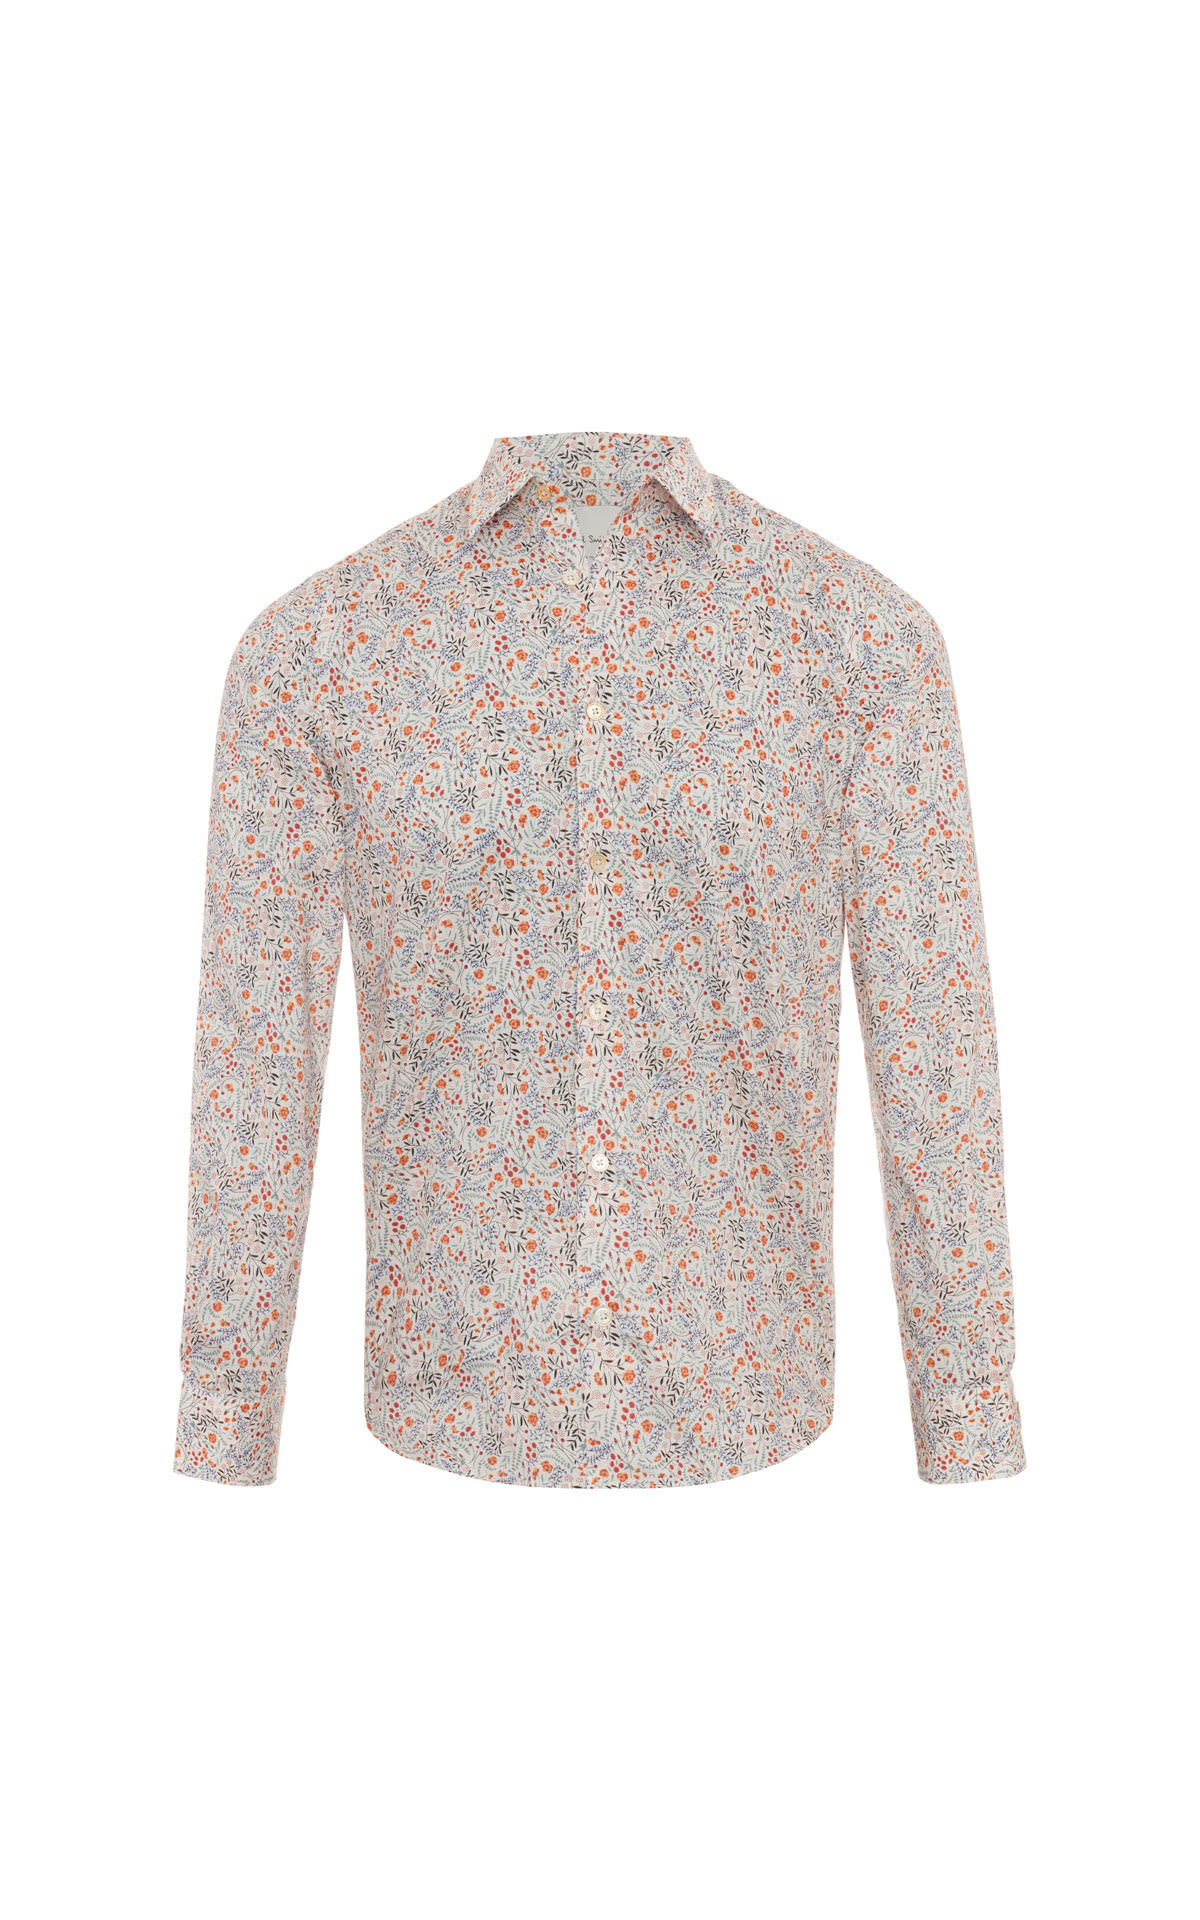 Paul Smith Floral print shirt from Bicester Village